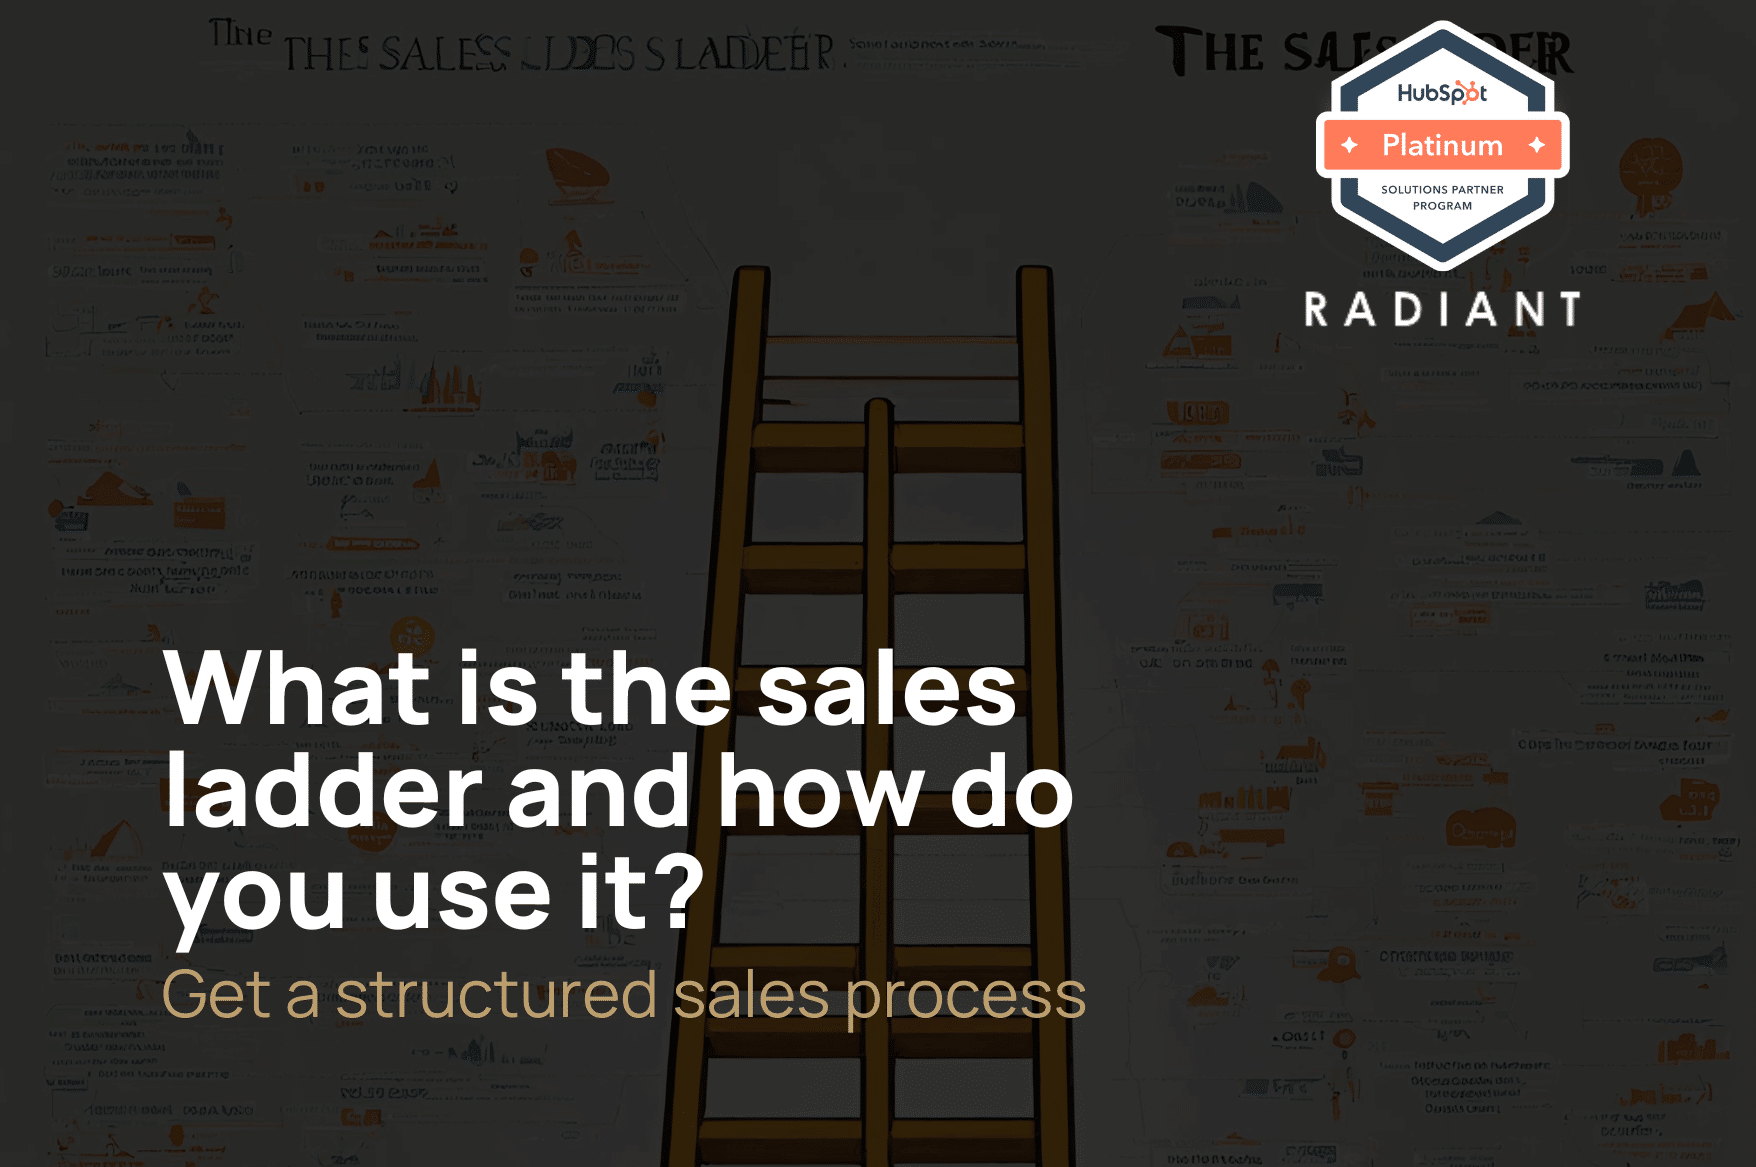 What is the sales ladder and how do you use it?